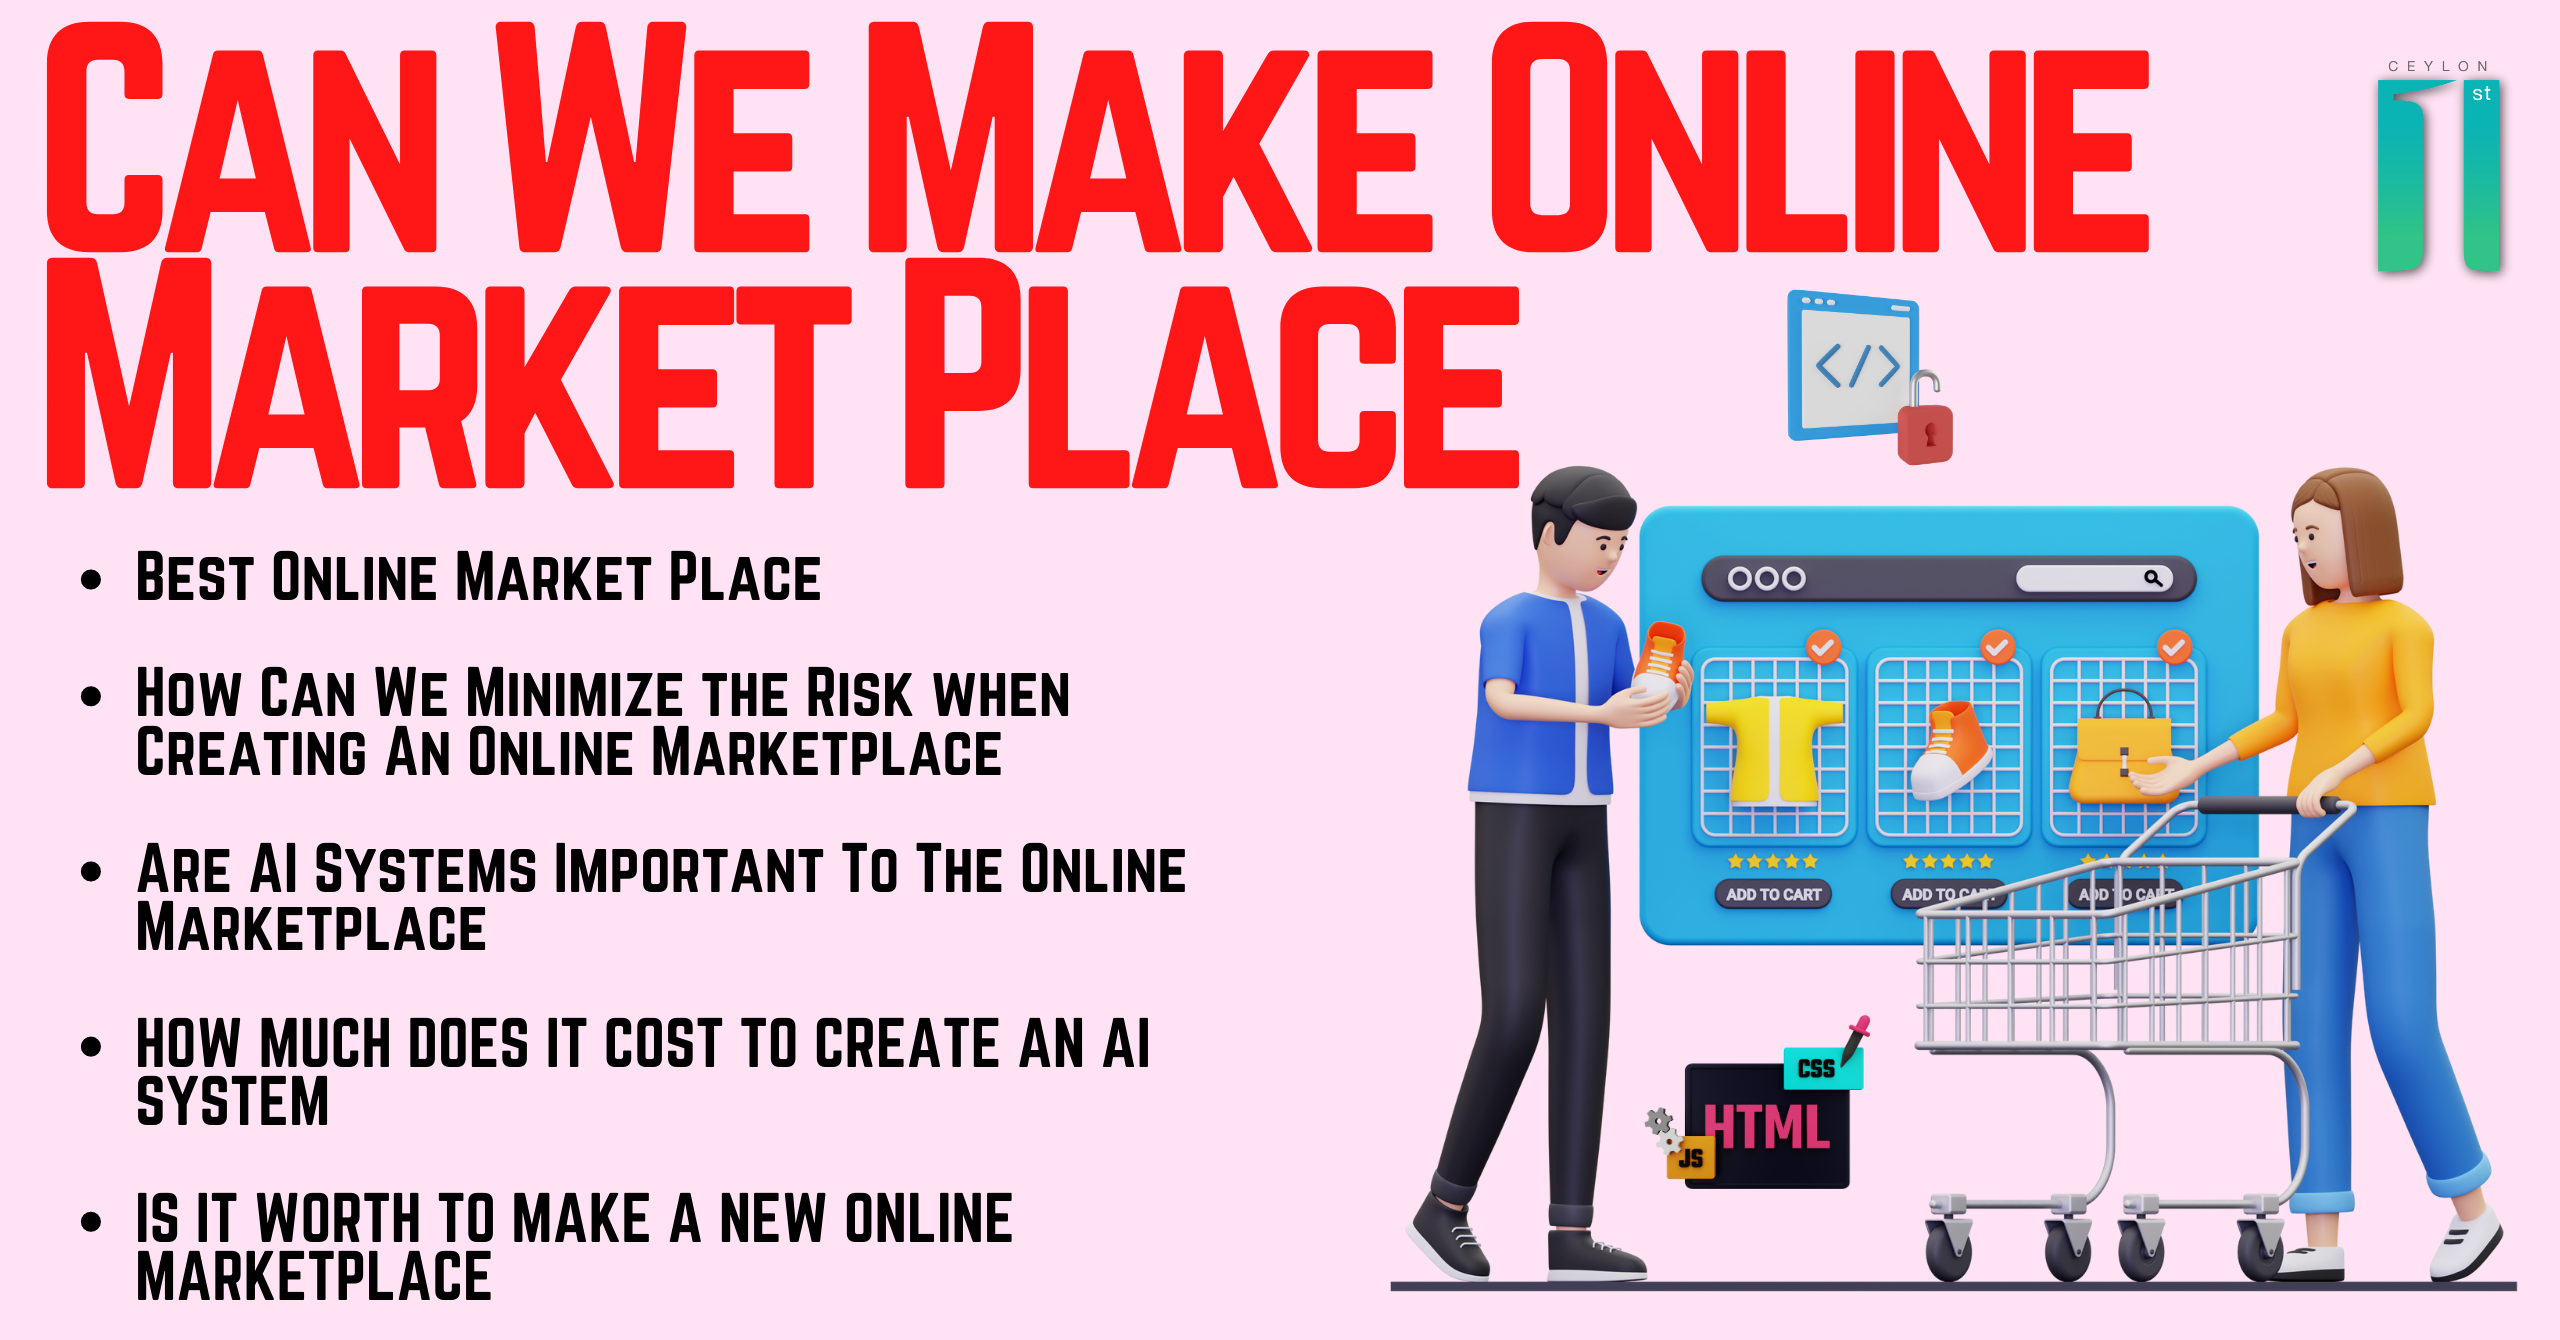 Can We Make Online Market Place